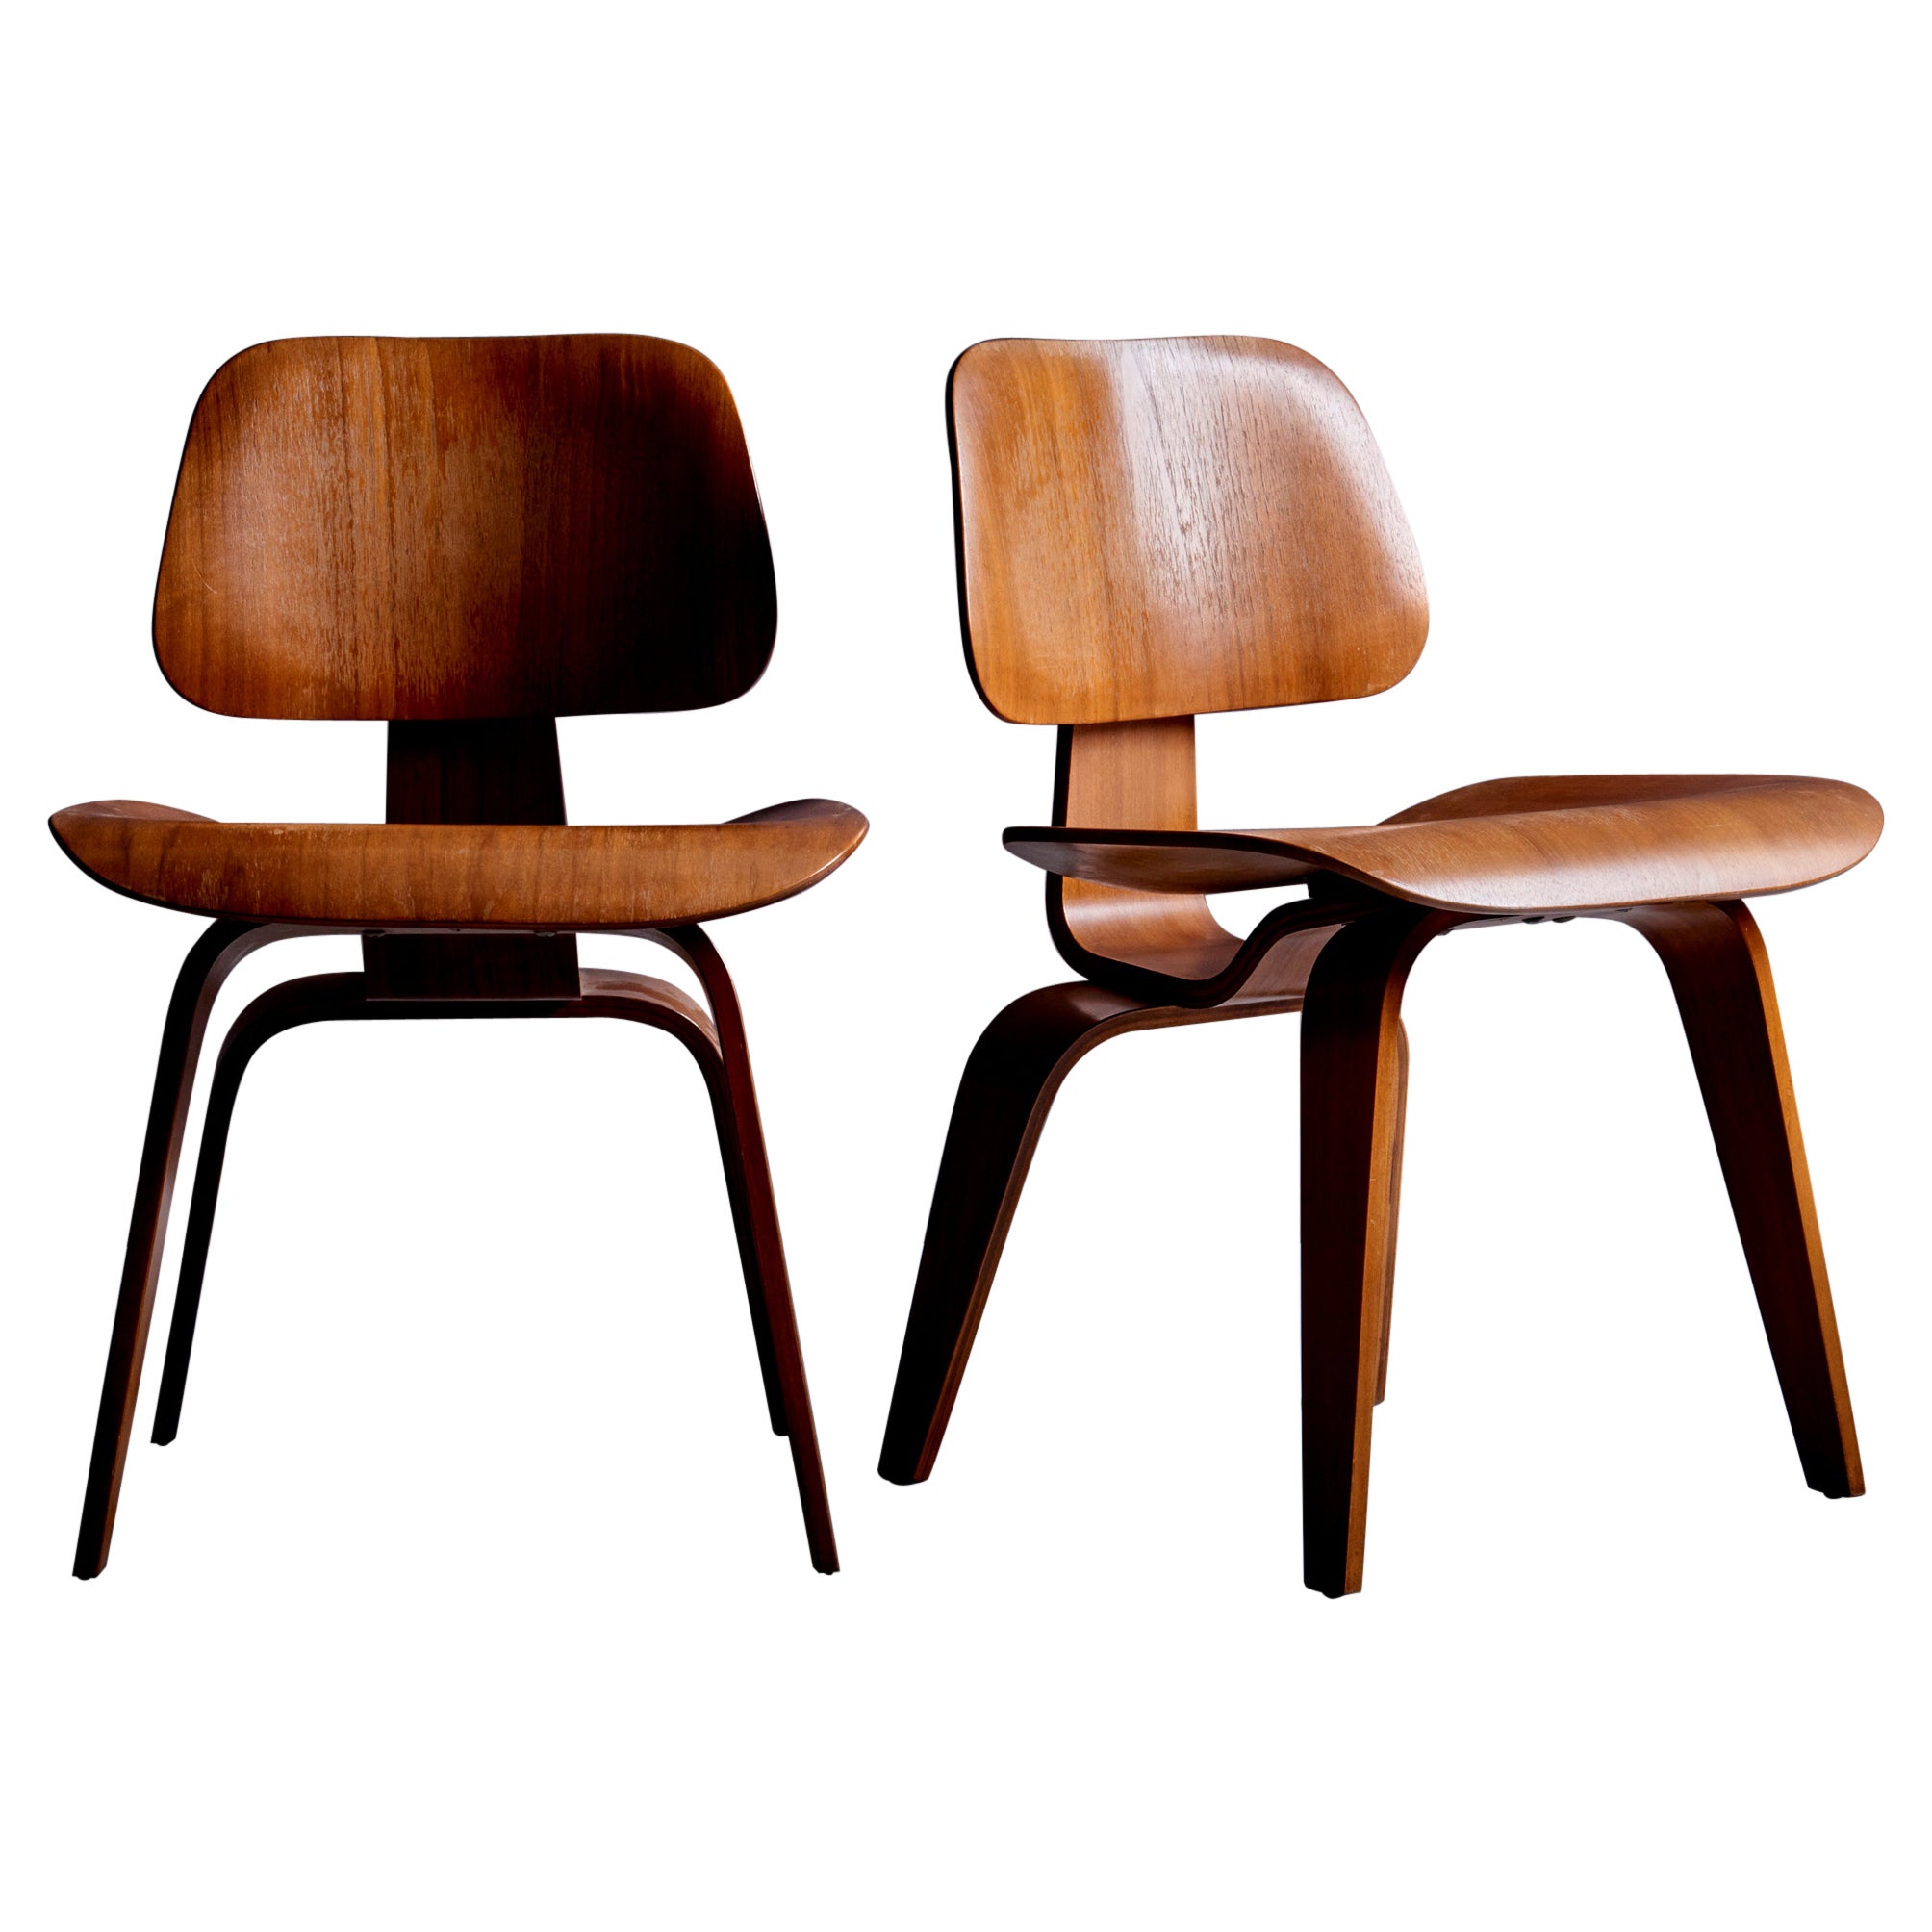 Set of Two Eames DCW Lounge Chairs in Walnut for Herman Miller, USA, 1950s For Sale